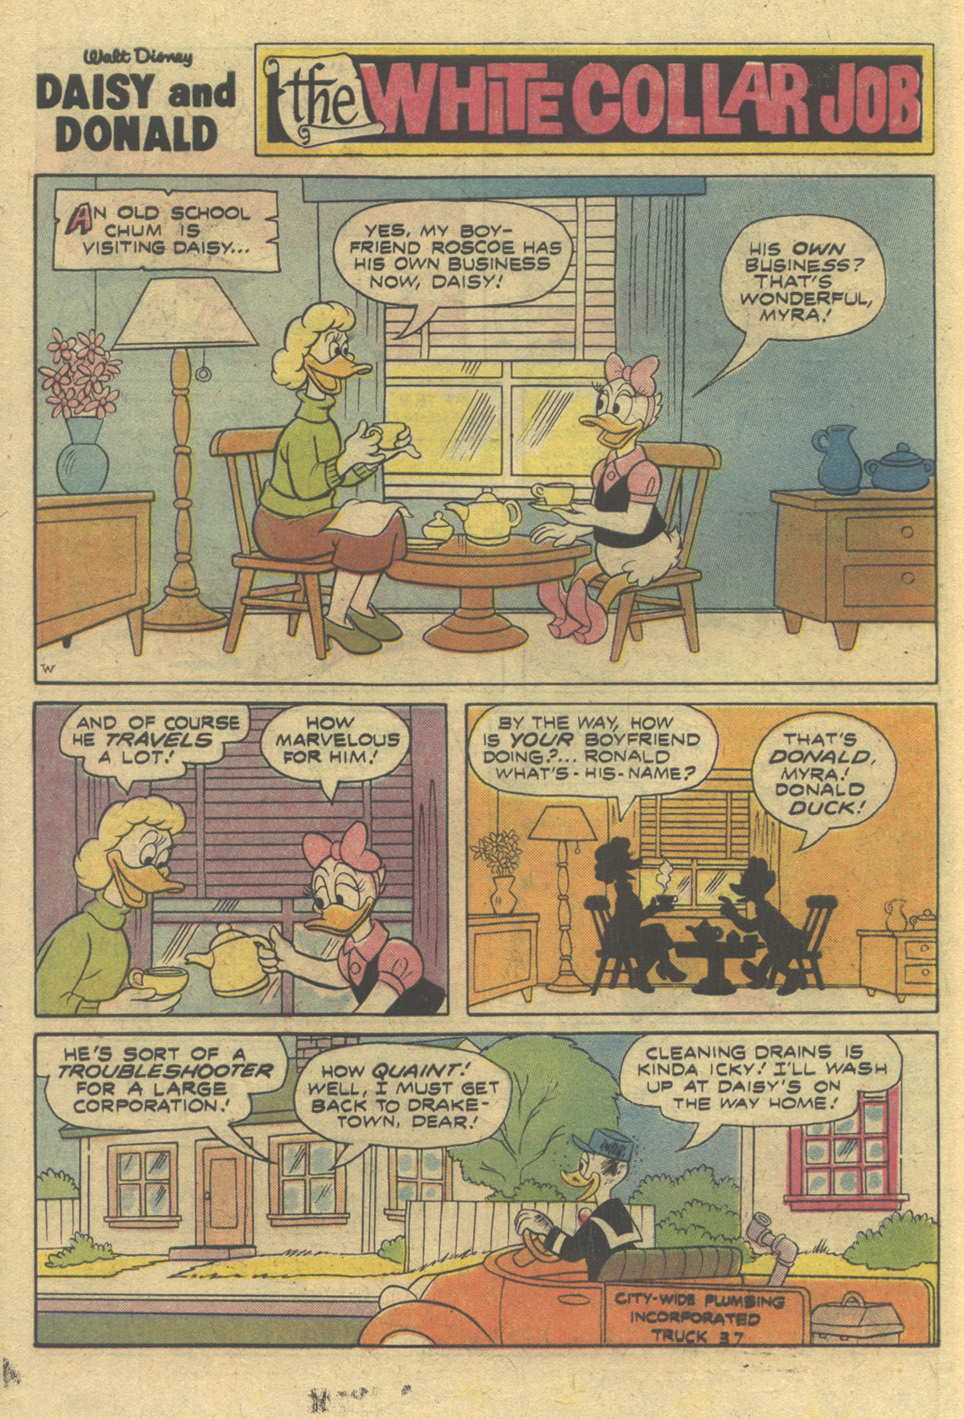 Read online Walt Disney Daisy and Donald comic -  Issue #24 - 10